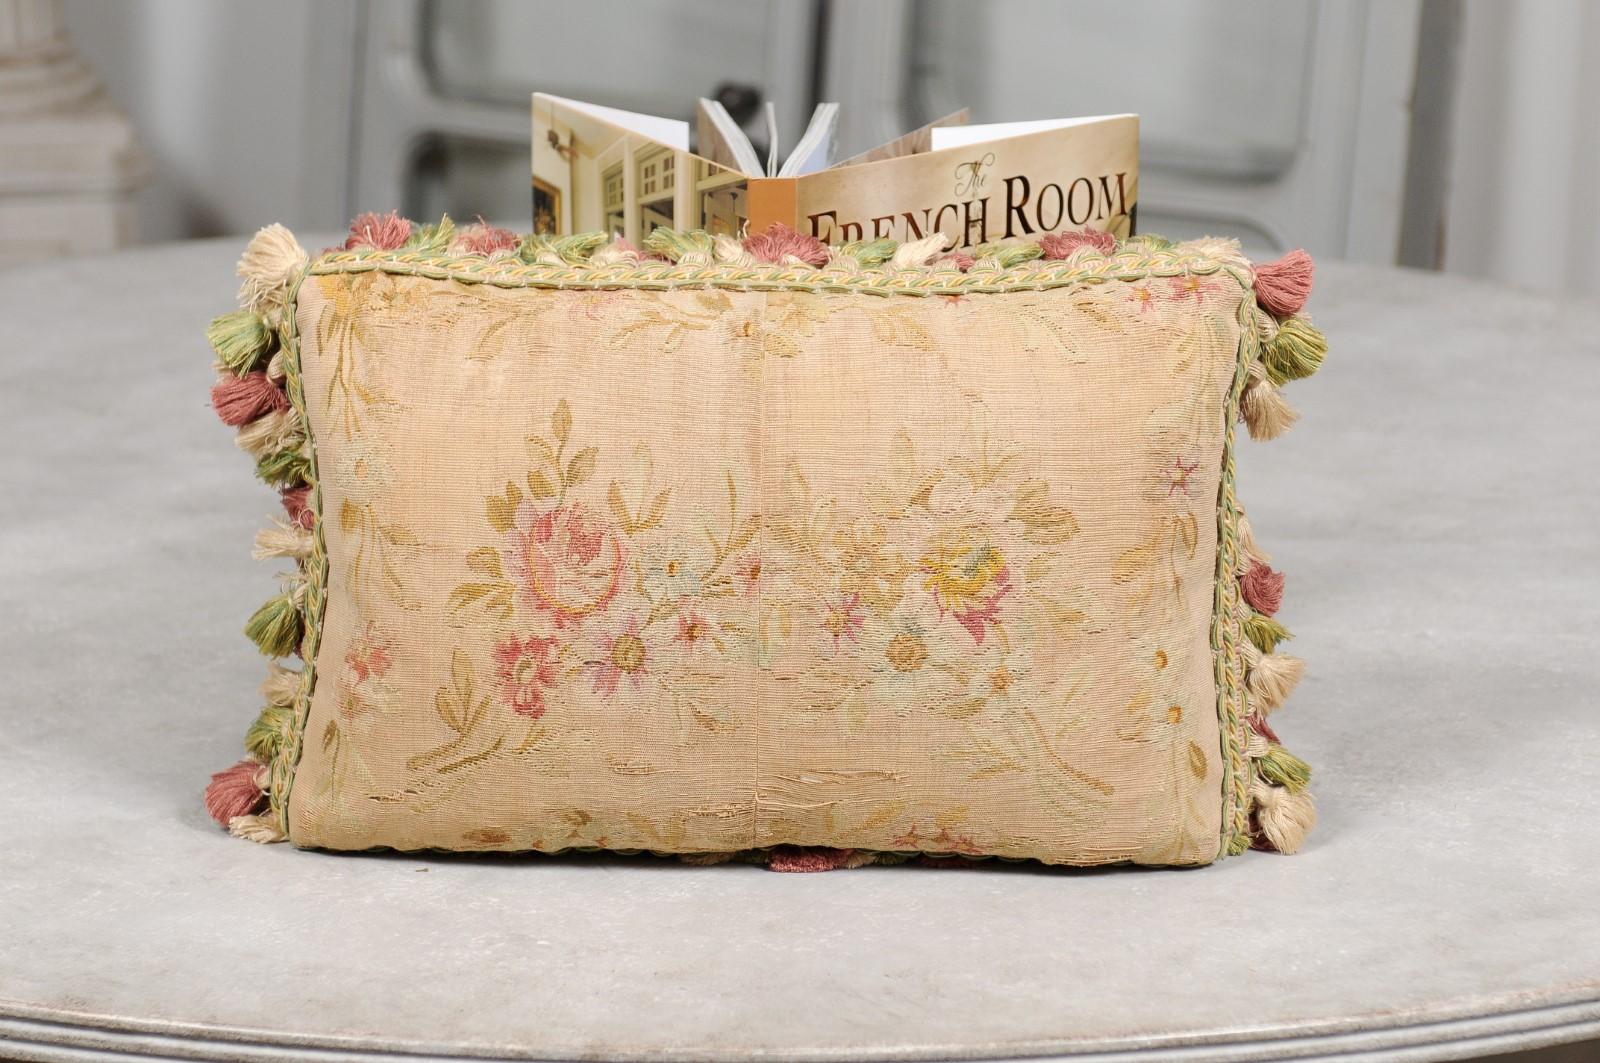 A French Aubusson tapestry pillow from the 19th century, with floral decor and tassels. Created during the 19th century in the Aubusson tapestry manufacture located in central France, this horizontal pillow features a delicate bouquet of pink roses